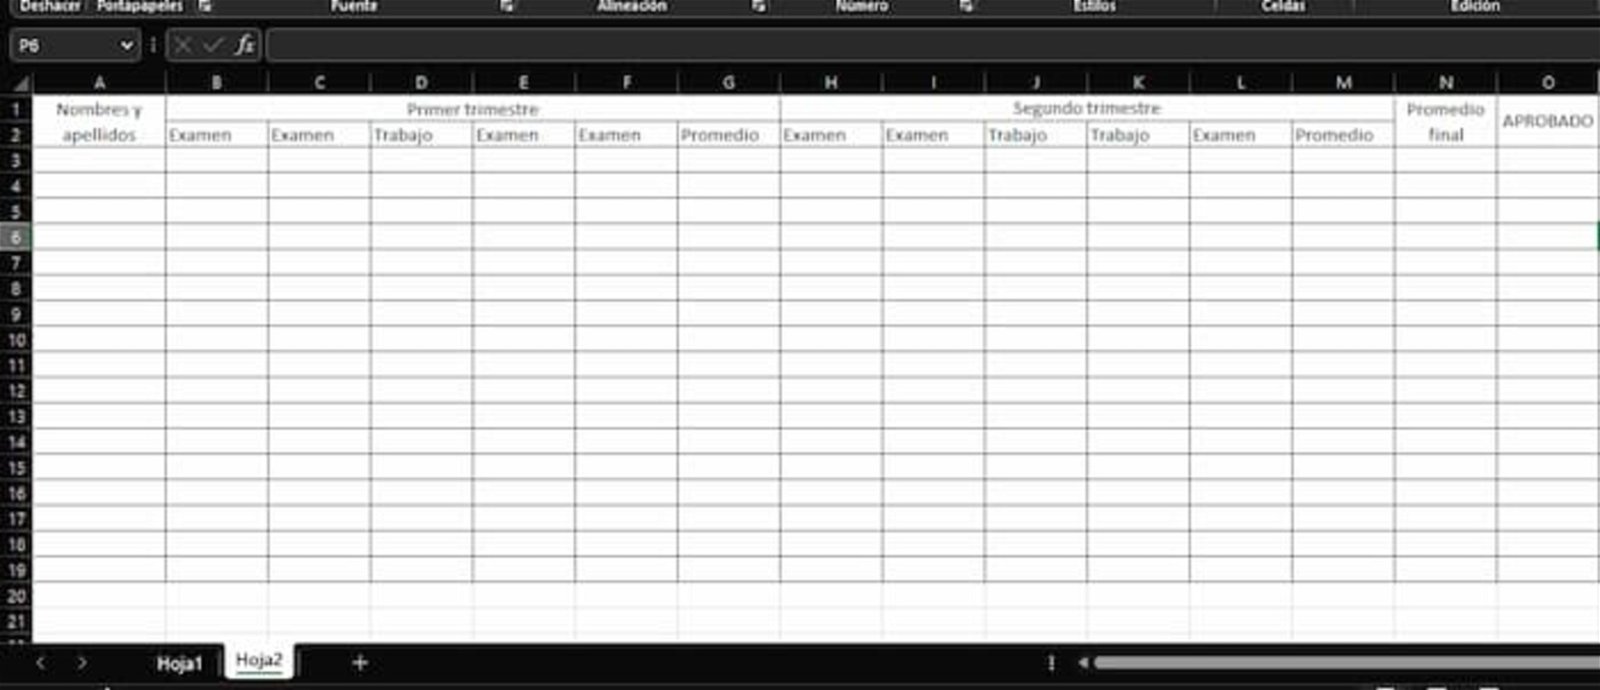 The first thing is to create the structure of the sheet for notes and grades in Excel